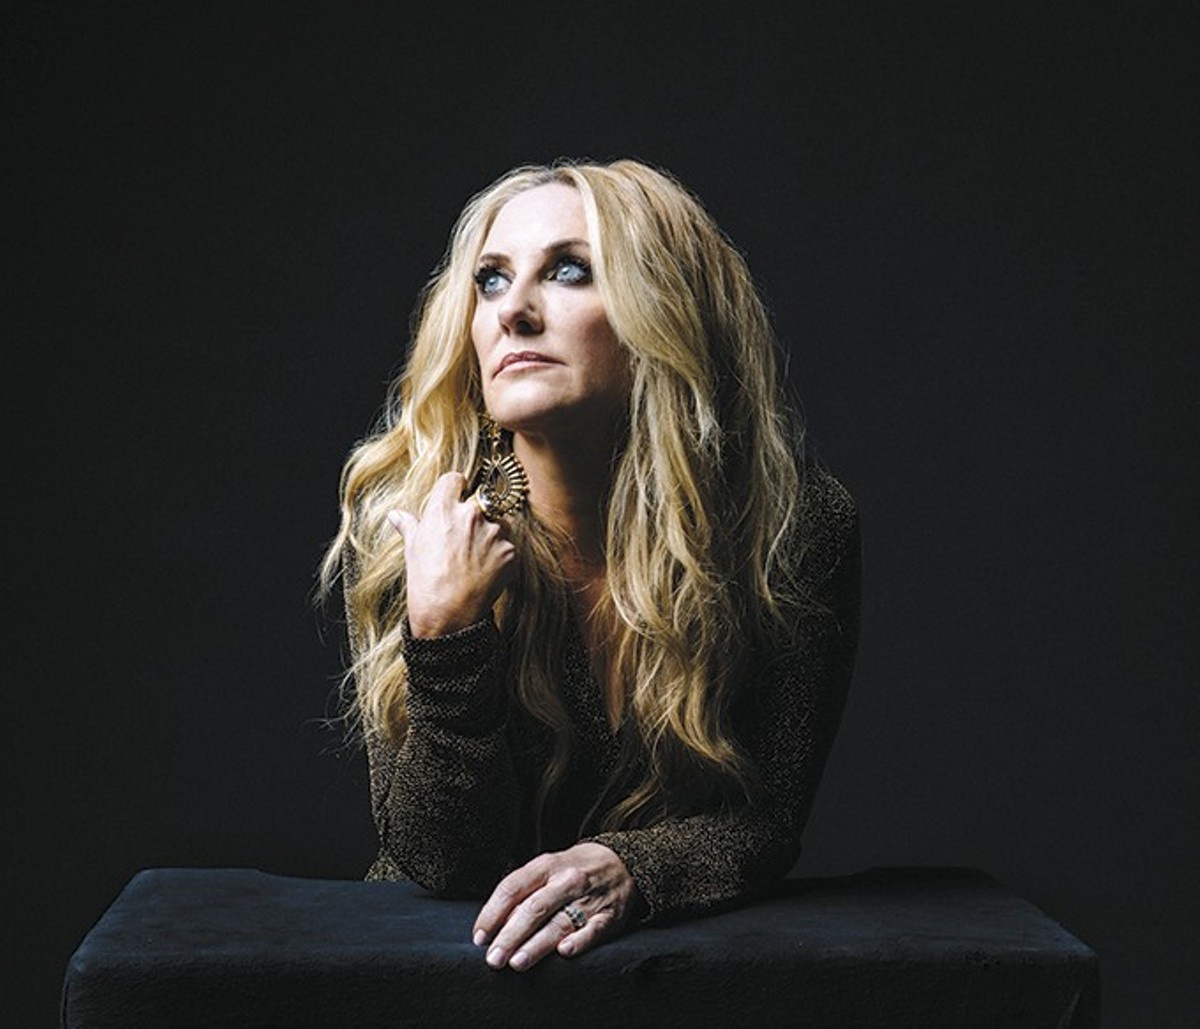 Lee Ann Womack's power to move audiences is as potent as ever on The Lonely, the Lonesome & the Gone.